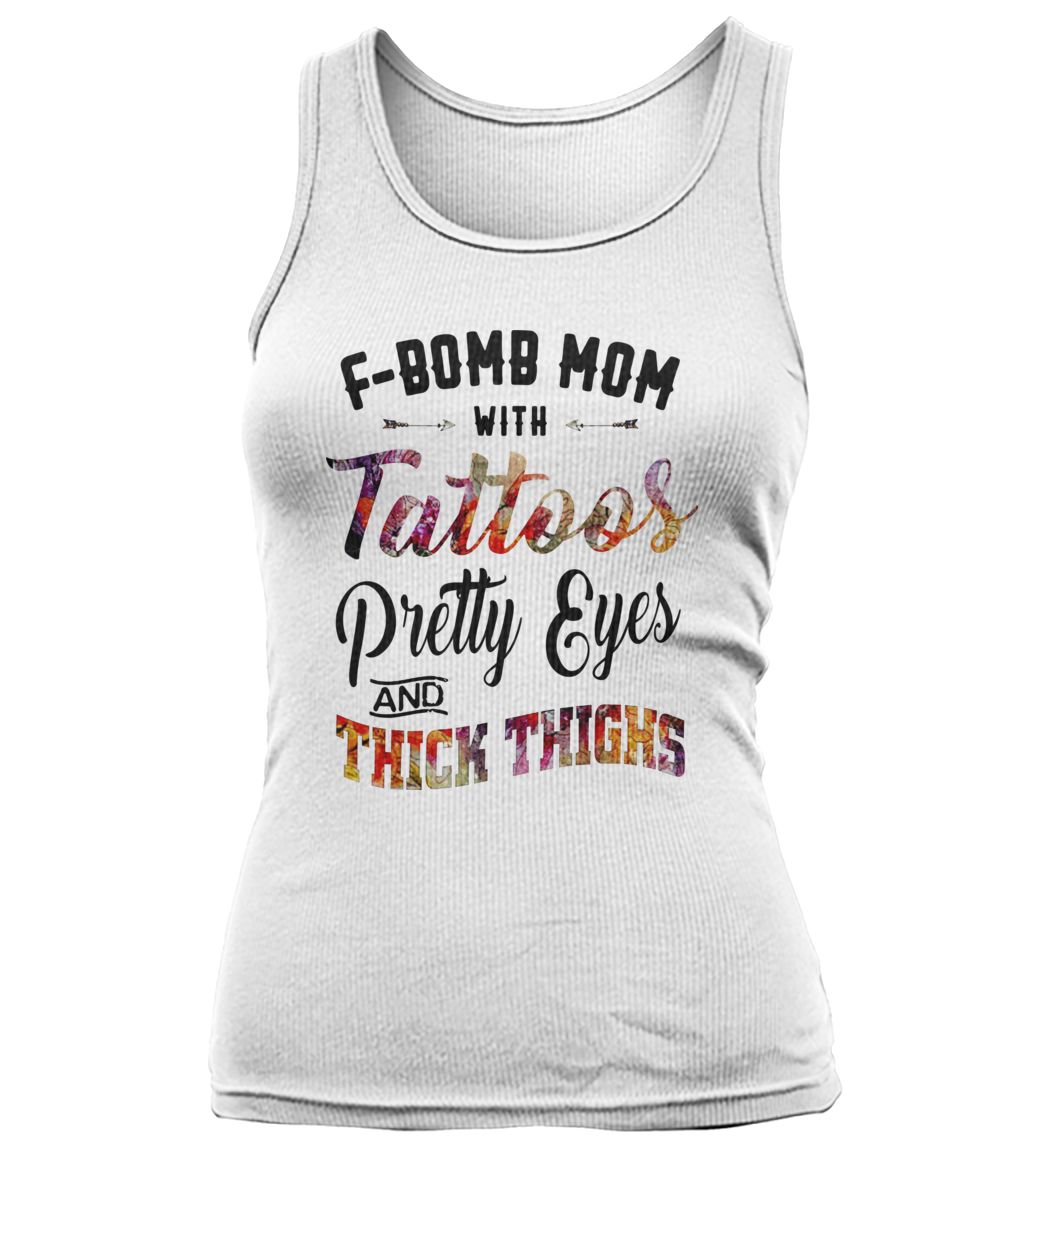 F bomb mom with tattoos pretty eyes and thick thighs women's tank top